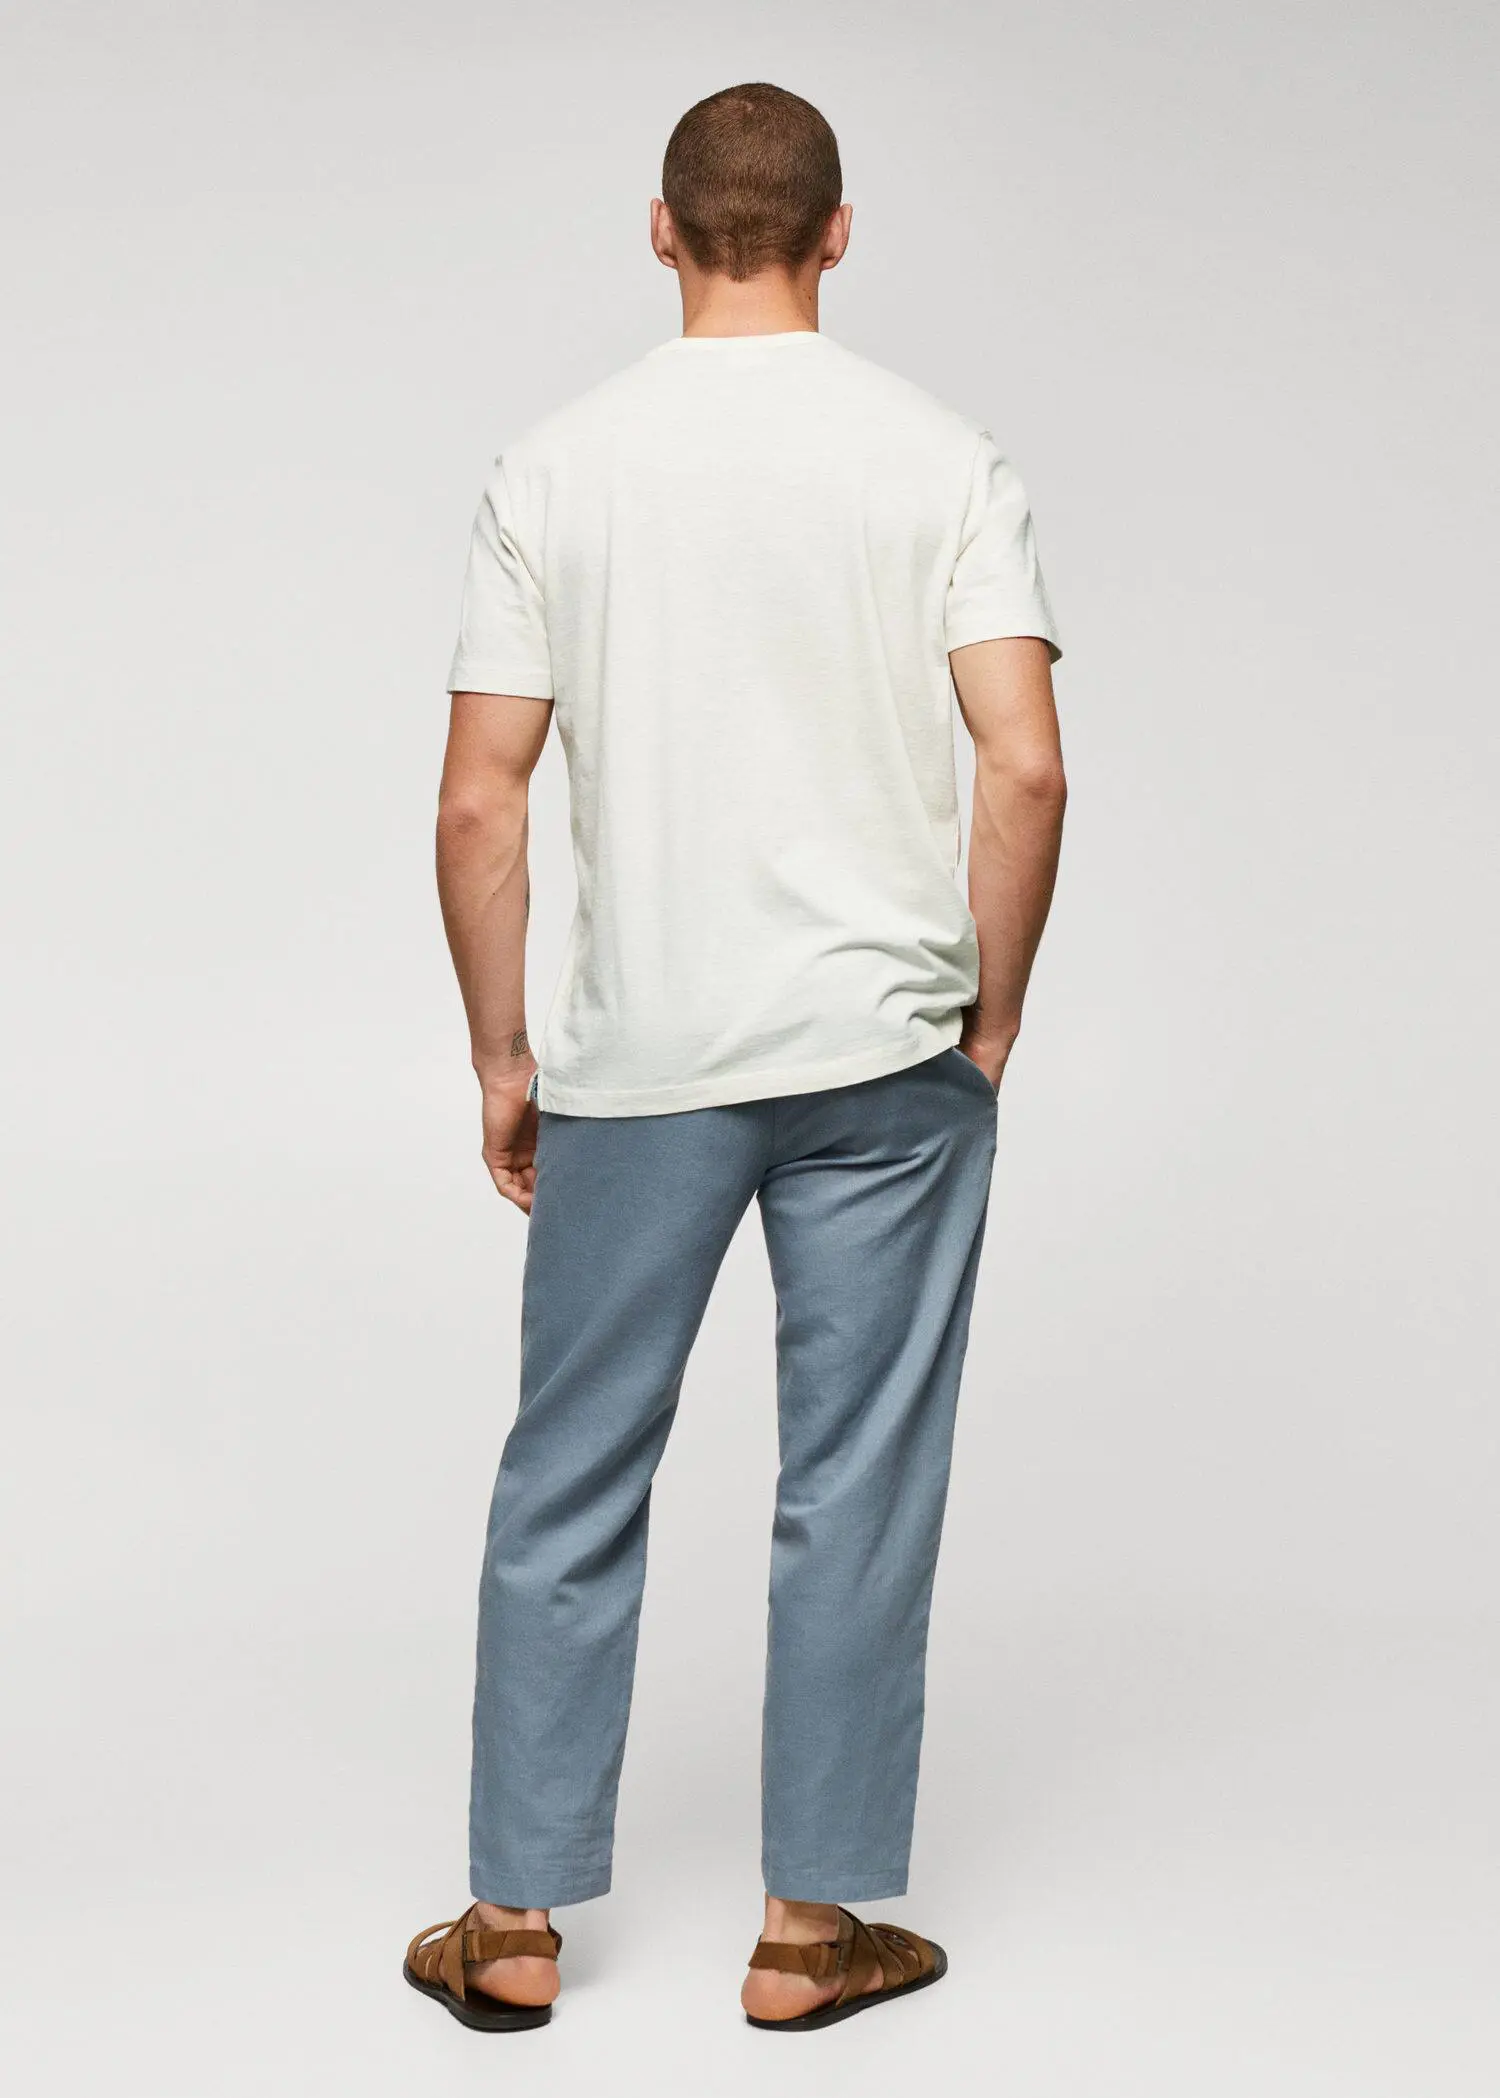 Mango 100% cotton t-shirt with pocket. a man standing with his hands in his pockets. 